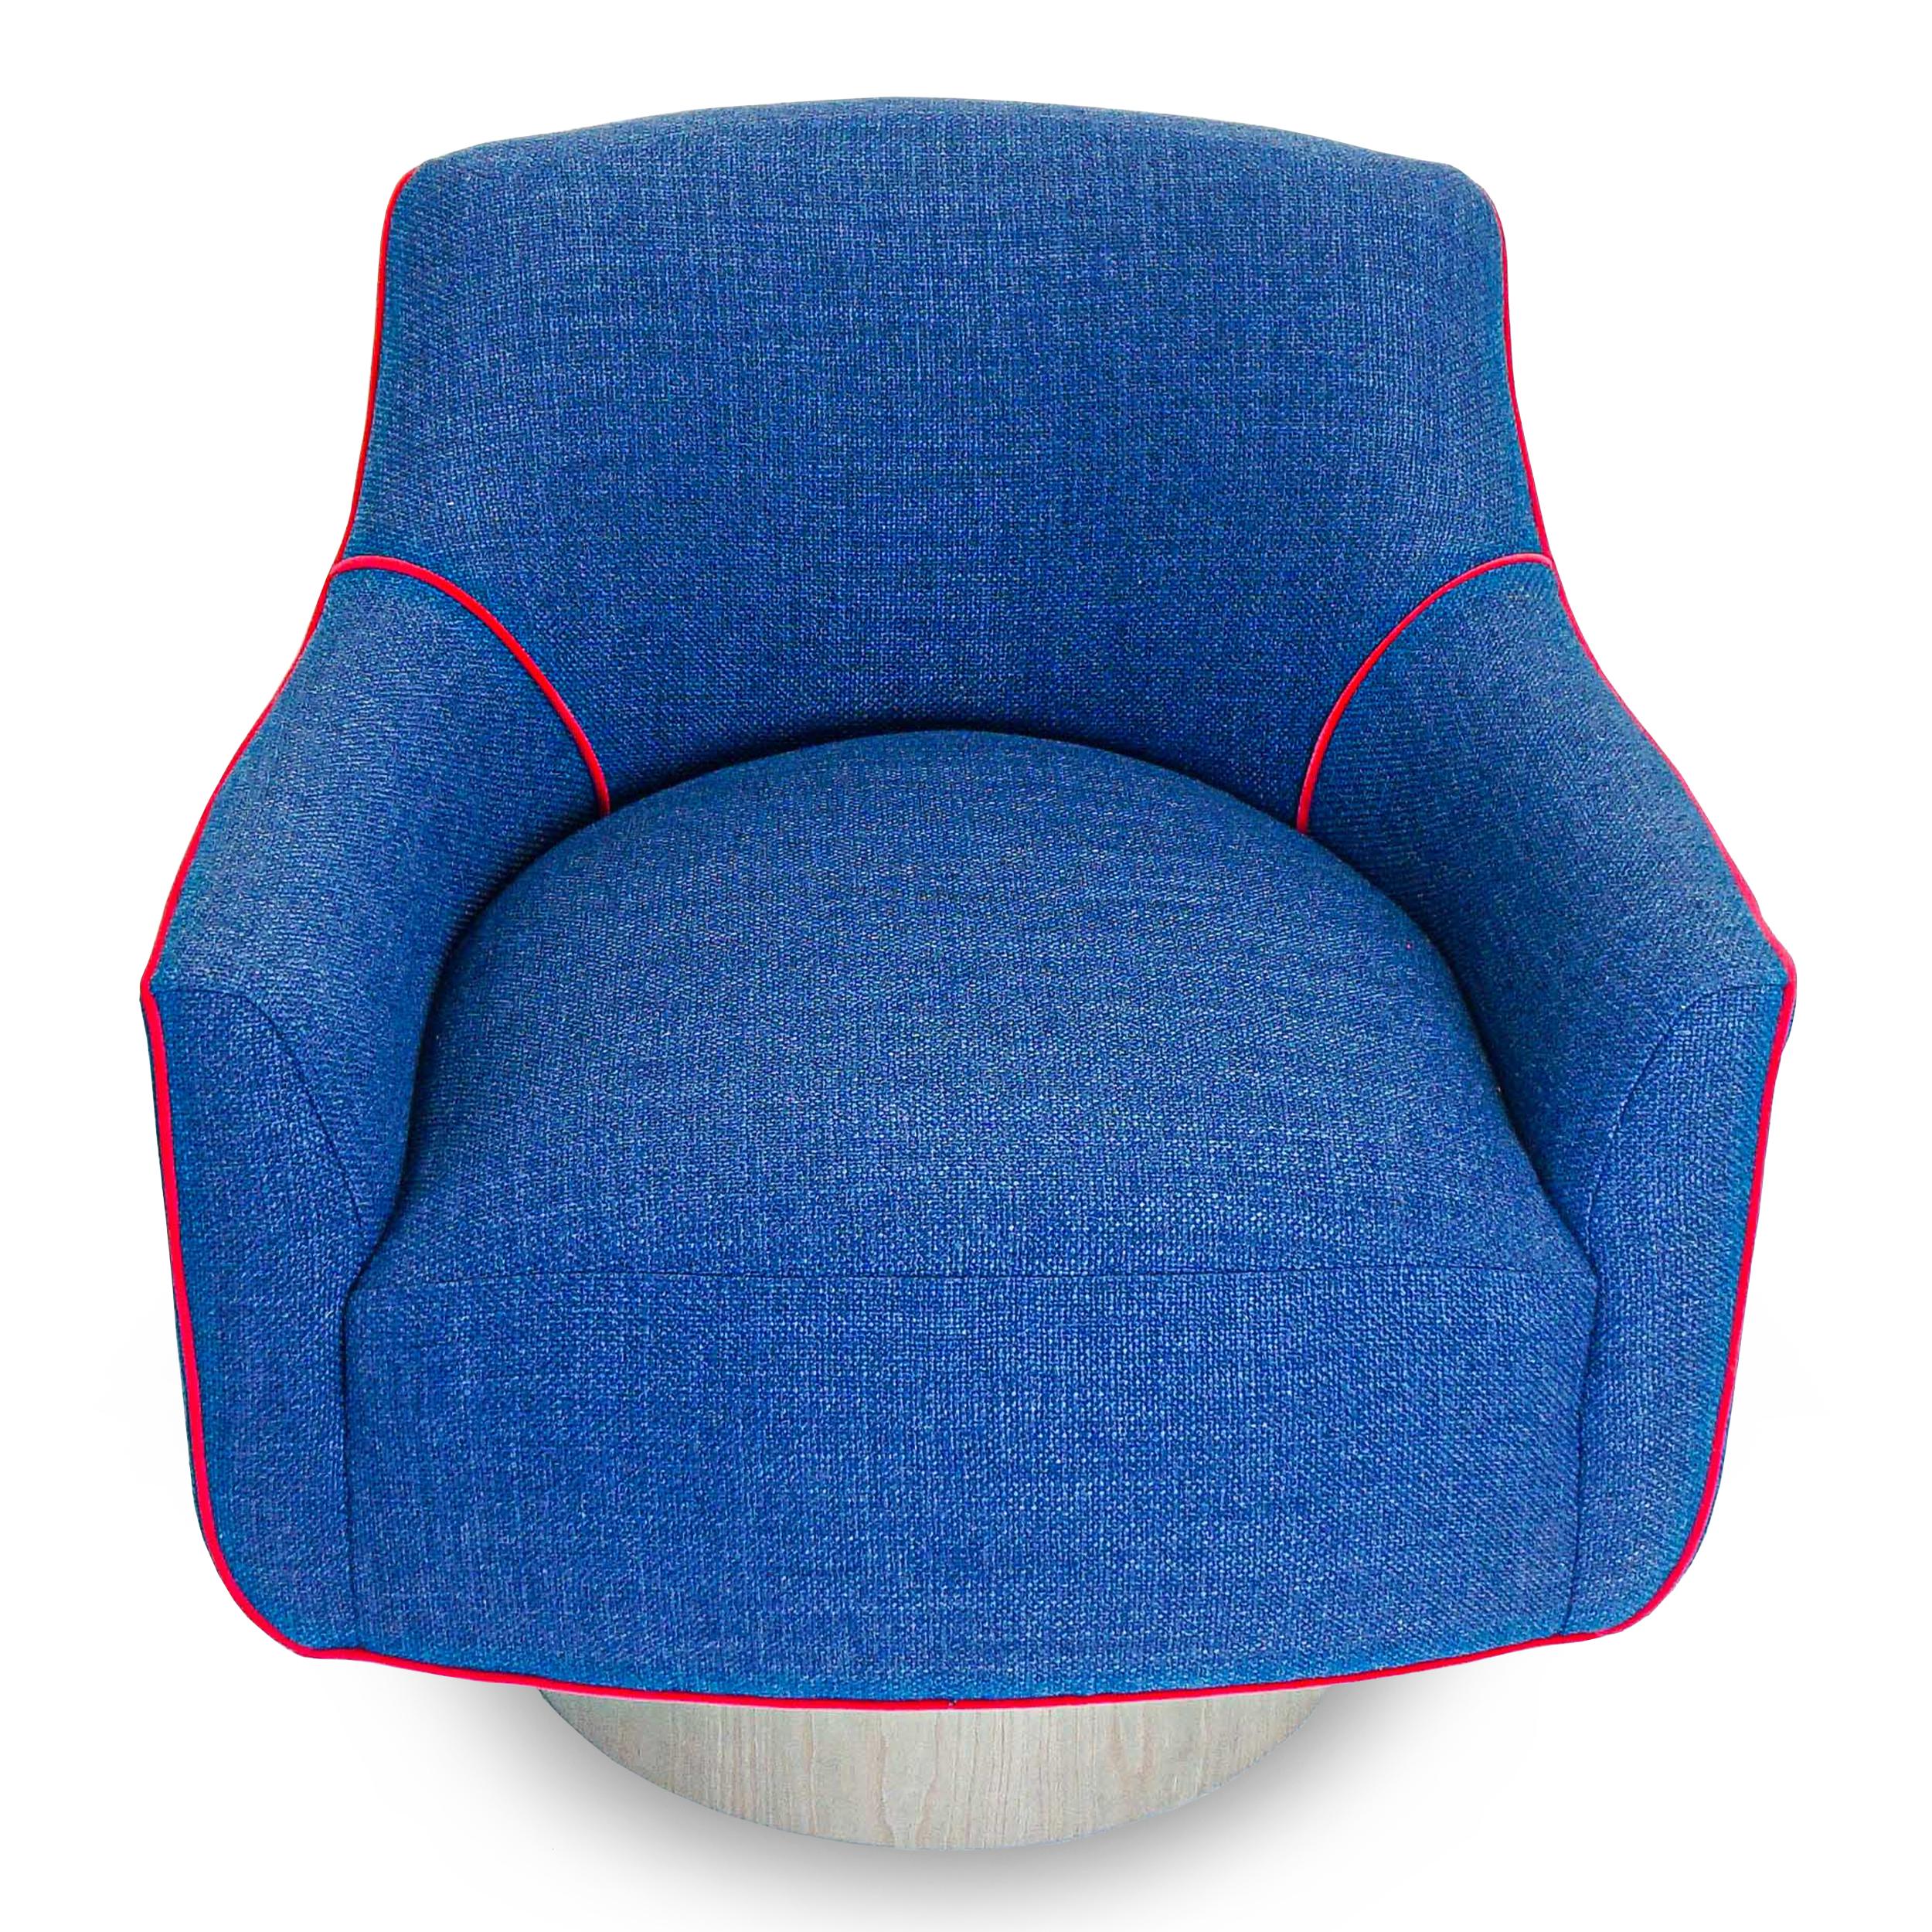 American Modern Swivel Chair in Blue Woven and Fuchsia Velvet Accent Welting For Sale